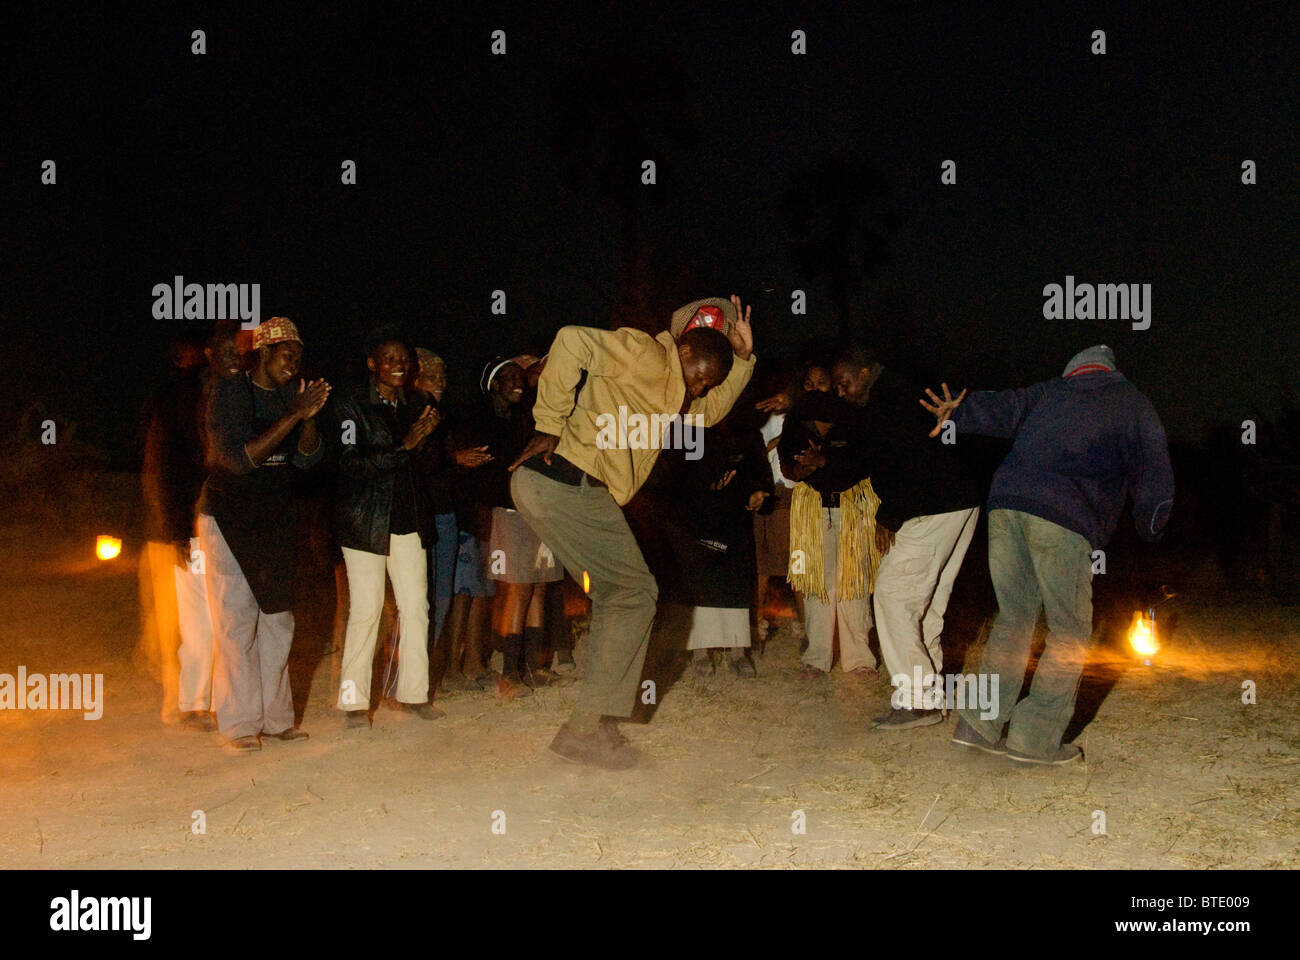 Local people dancing around a small campfire at night Stock Photo